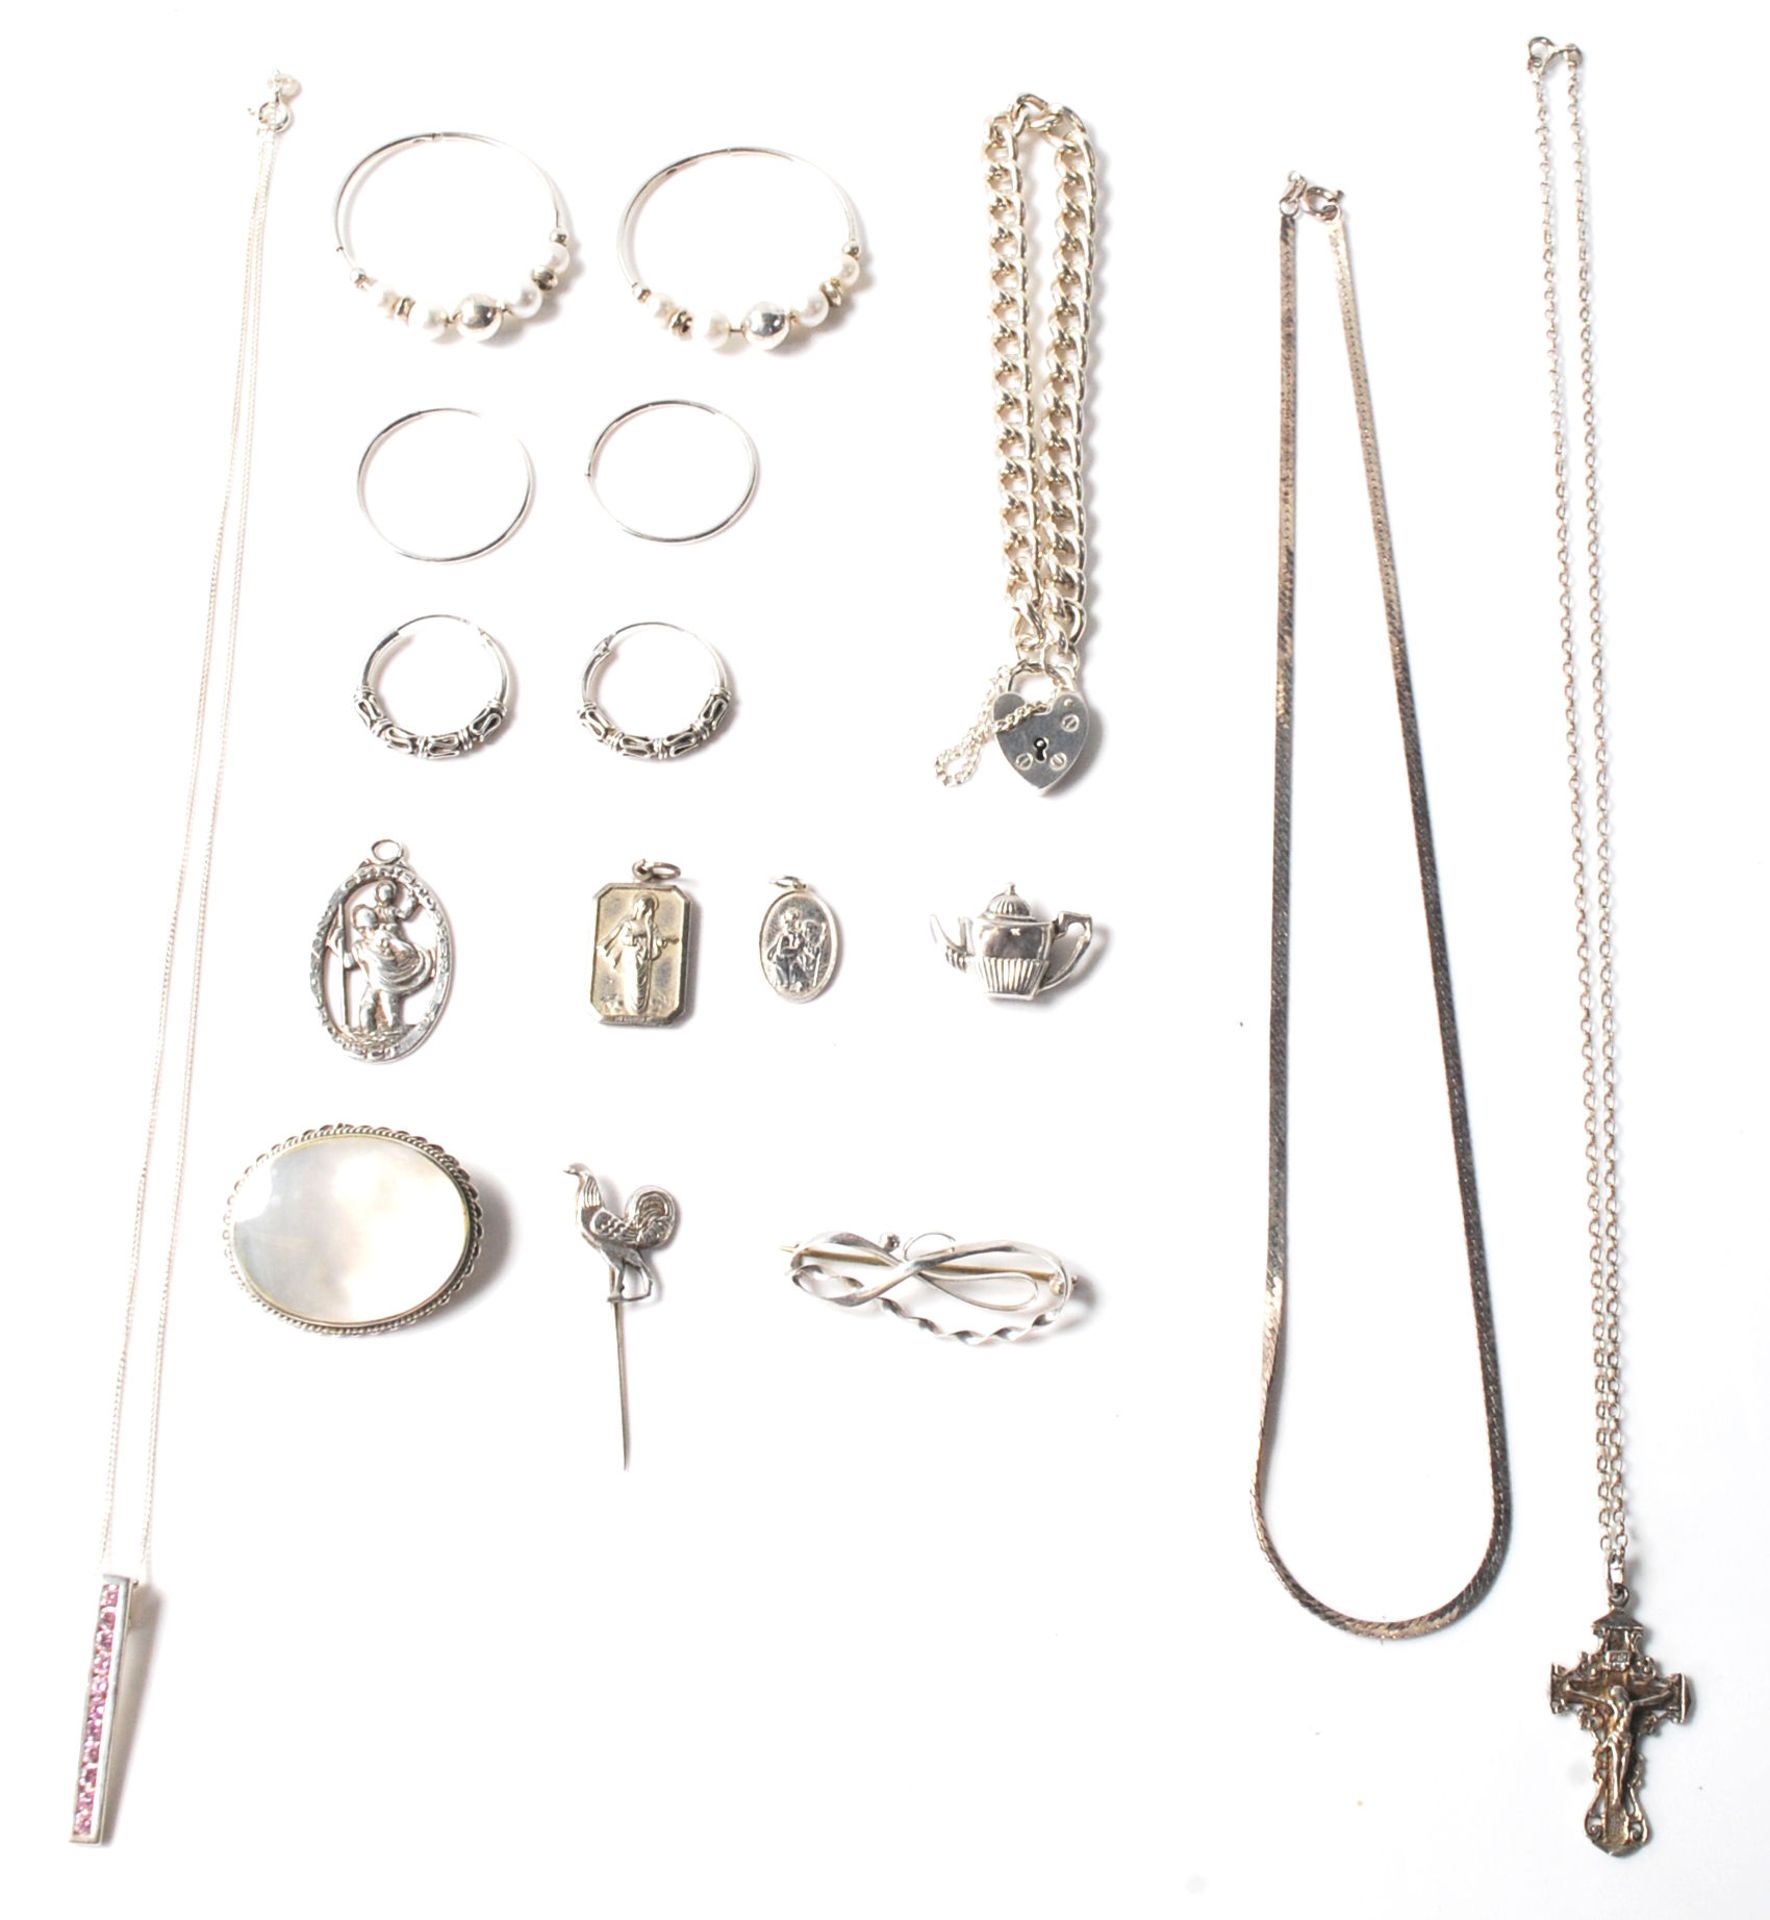 A large collection of hallmarked sterling silver jewellery to include a solid silver bracelet with